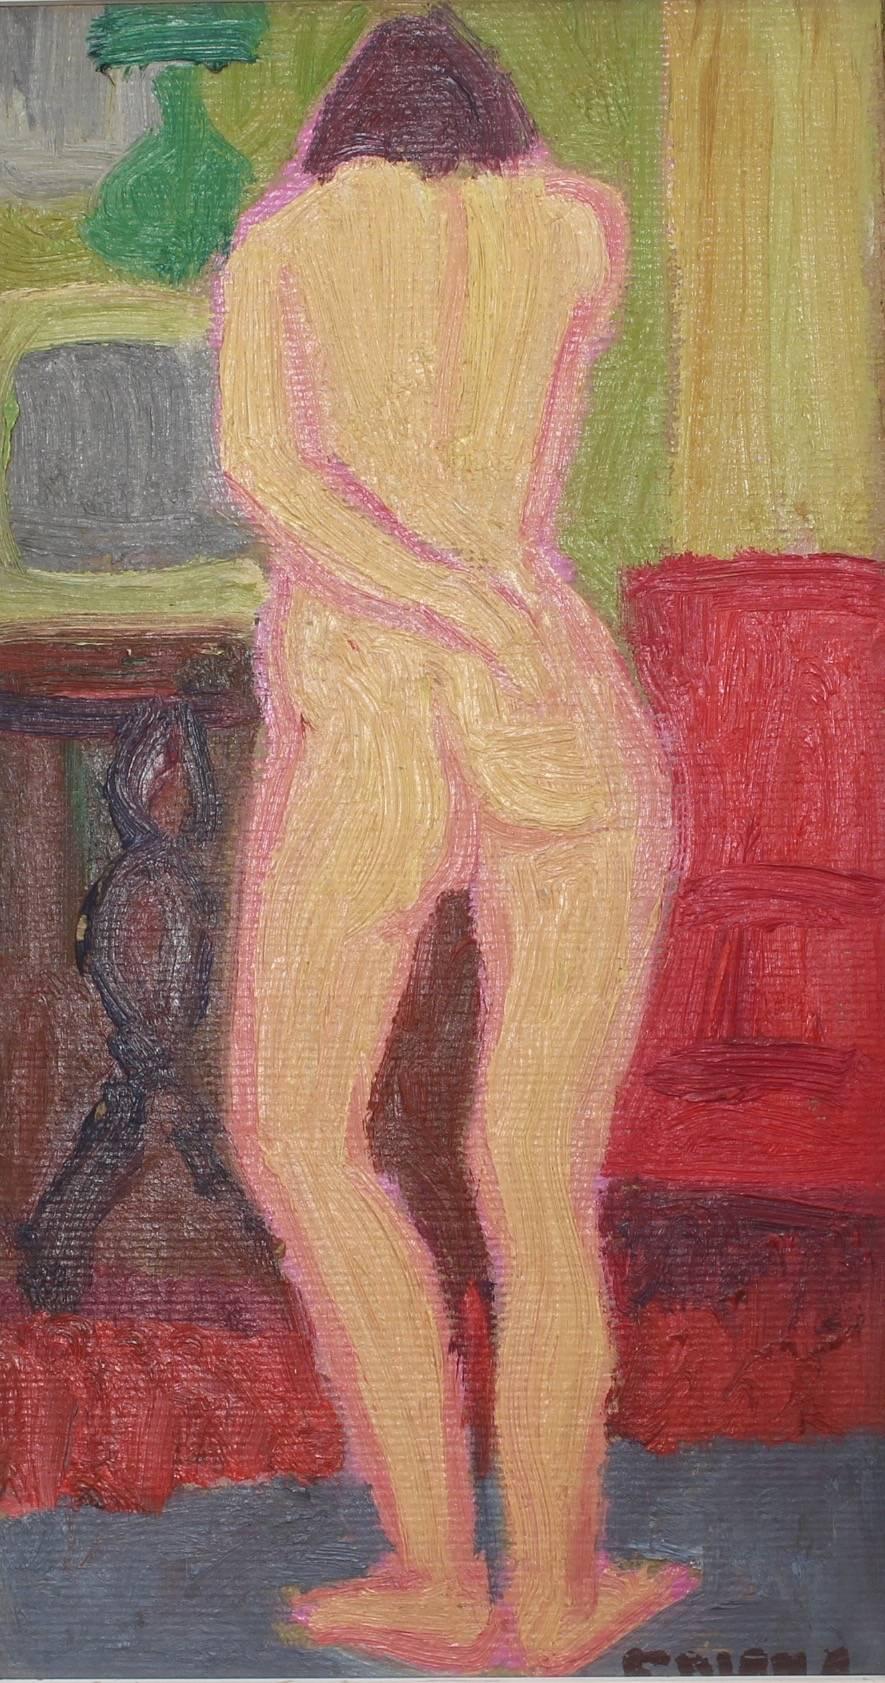 'Standing Nude', oil on board, (c. 1960s) by François Diana (1903 - 1993). This work of sumptuous colour and sensuous subject matter is immediately appealing. It is summertime in the French Riviera and Provence. A woman, nude, poses for the artist